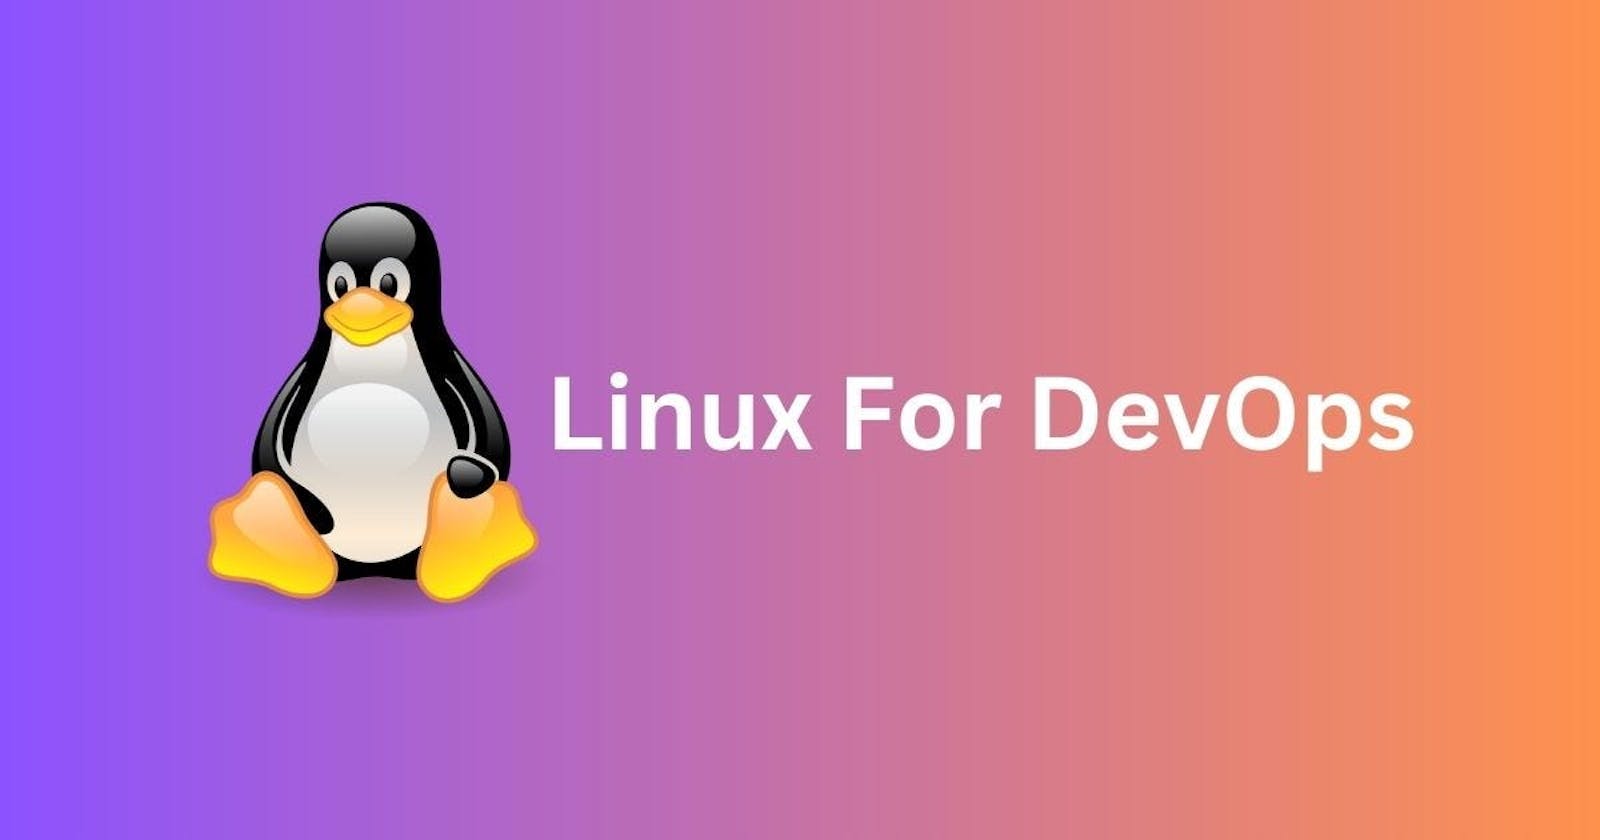 Essential Linux Commands for DevOps: A Quick Reference Guide